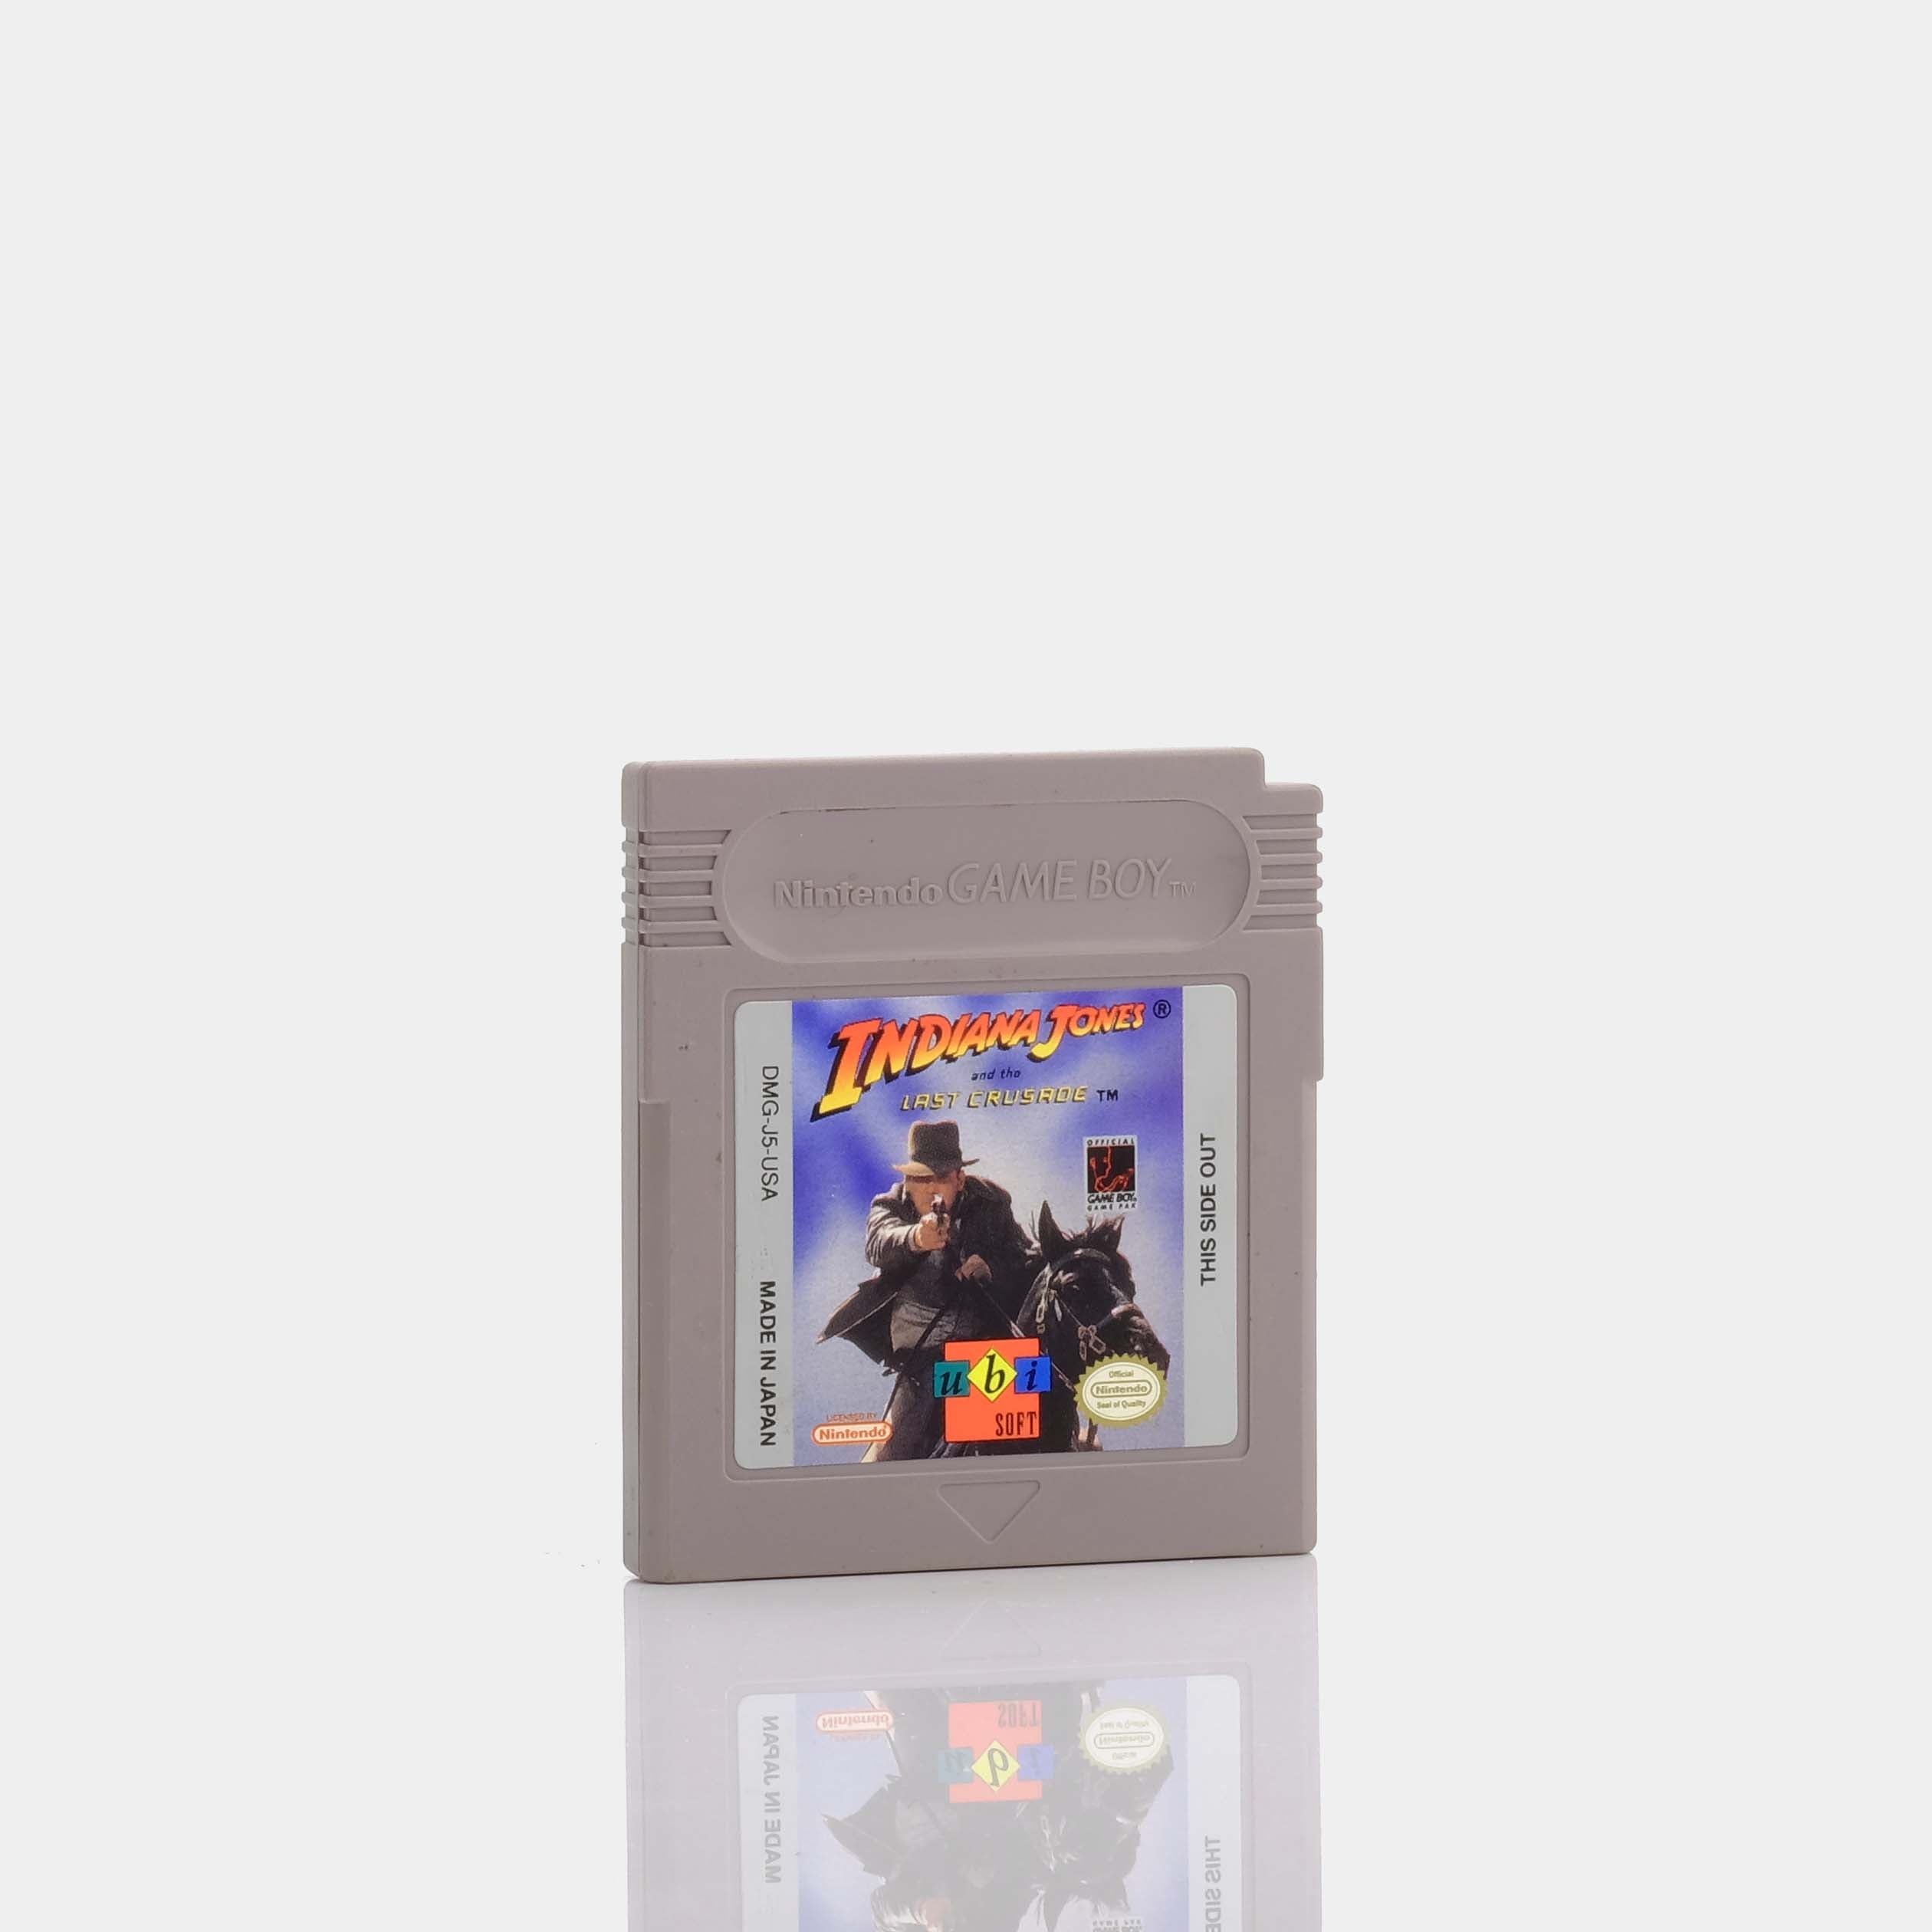 Indiana Jones and The Last Crusade (1993) Game Boy Game